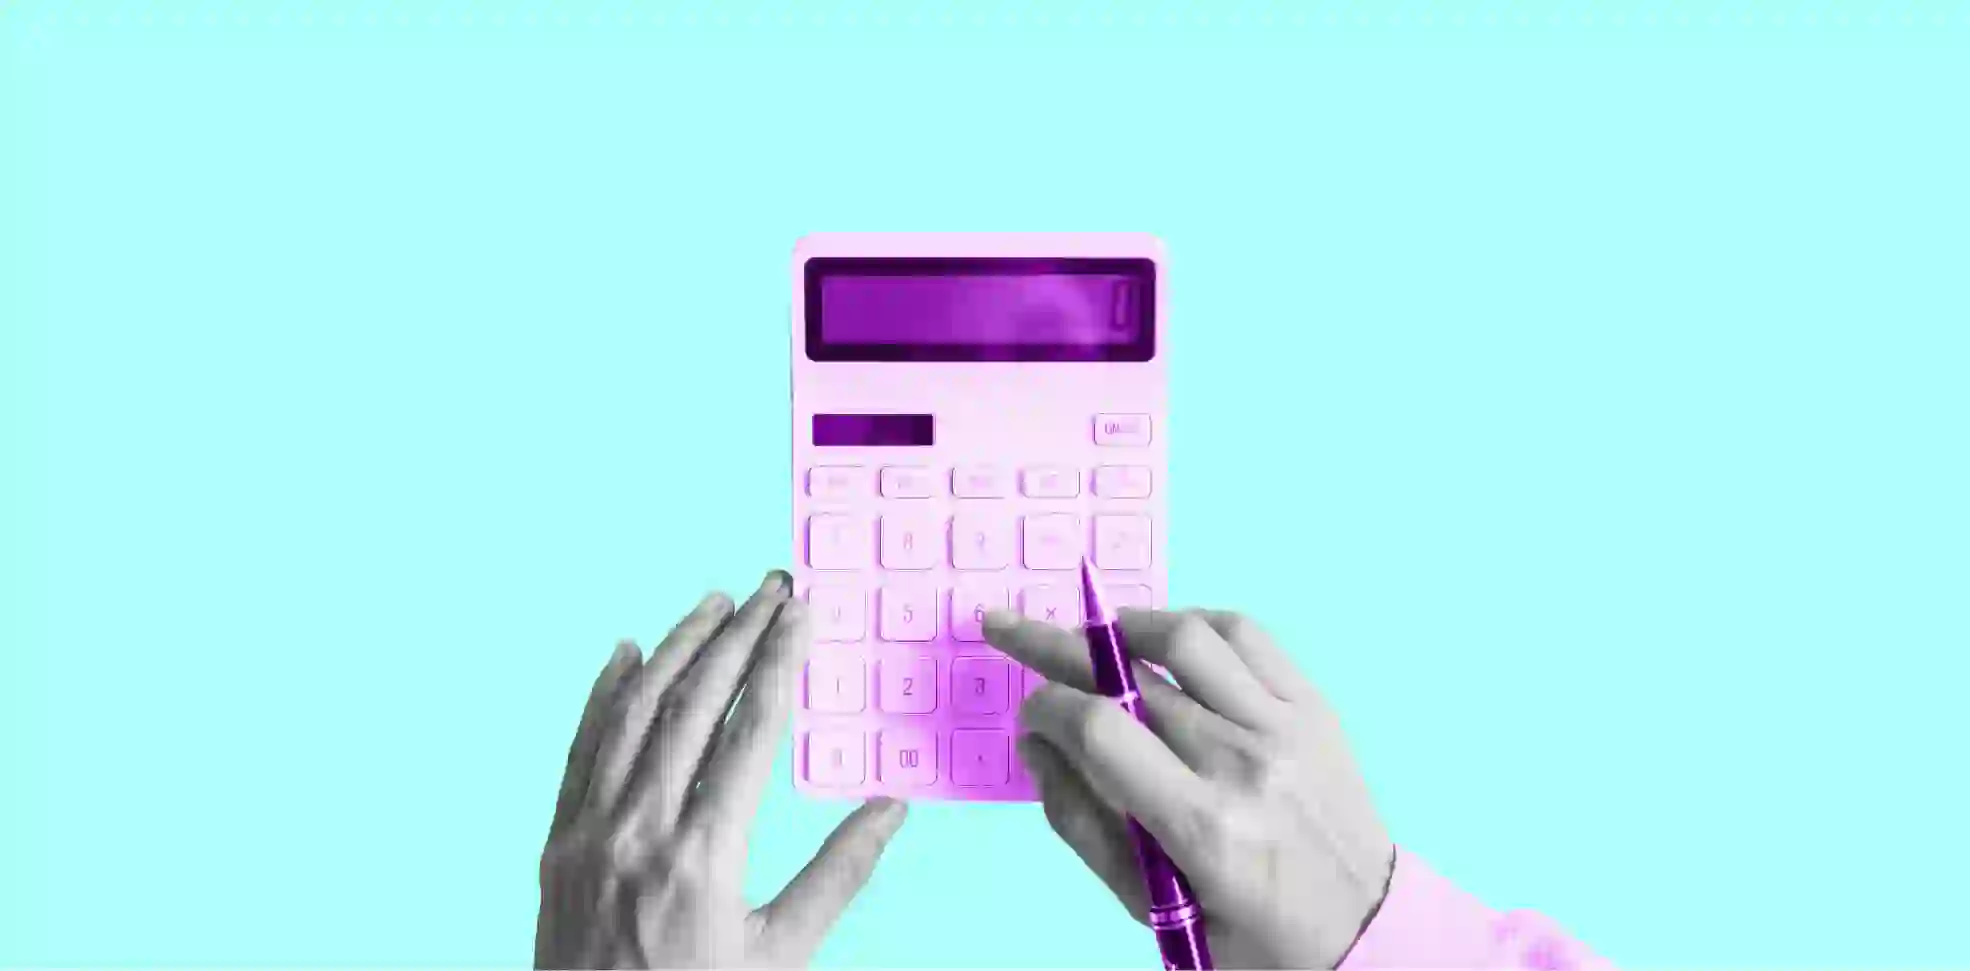 a man counting on a calculator